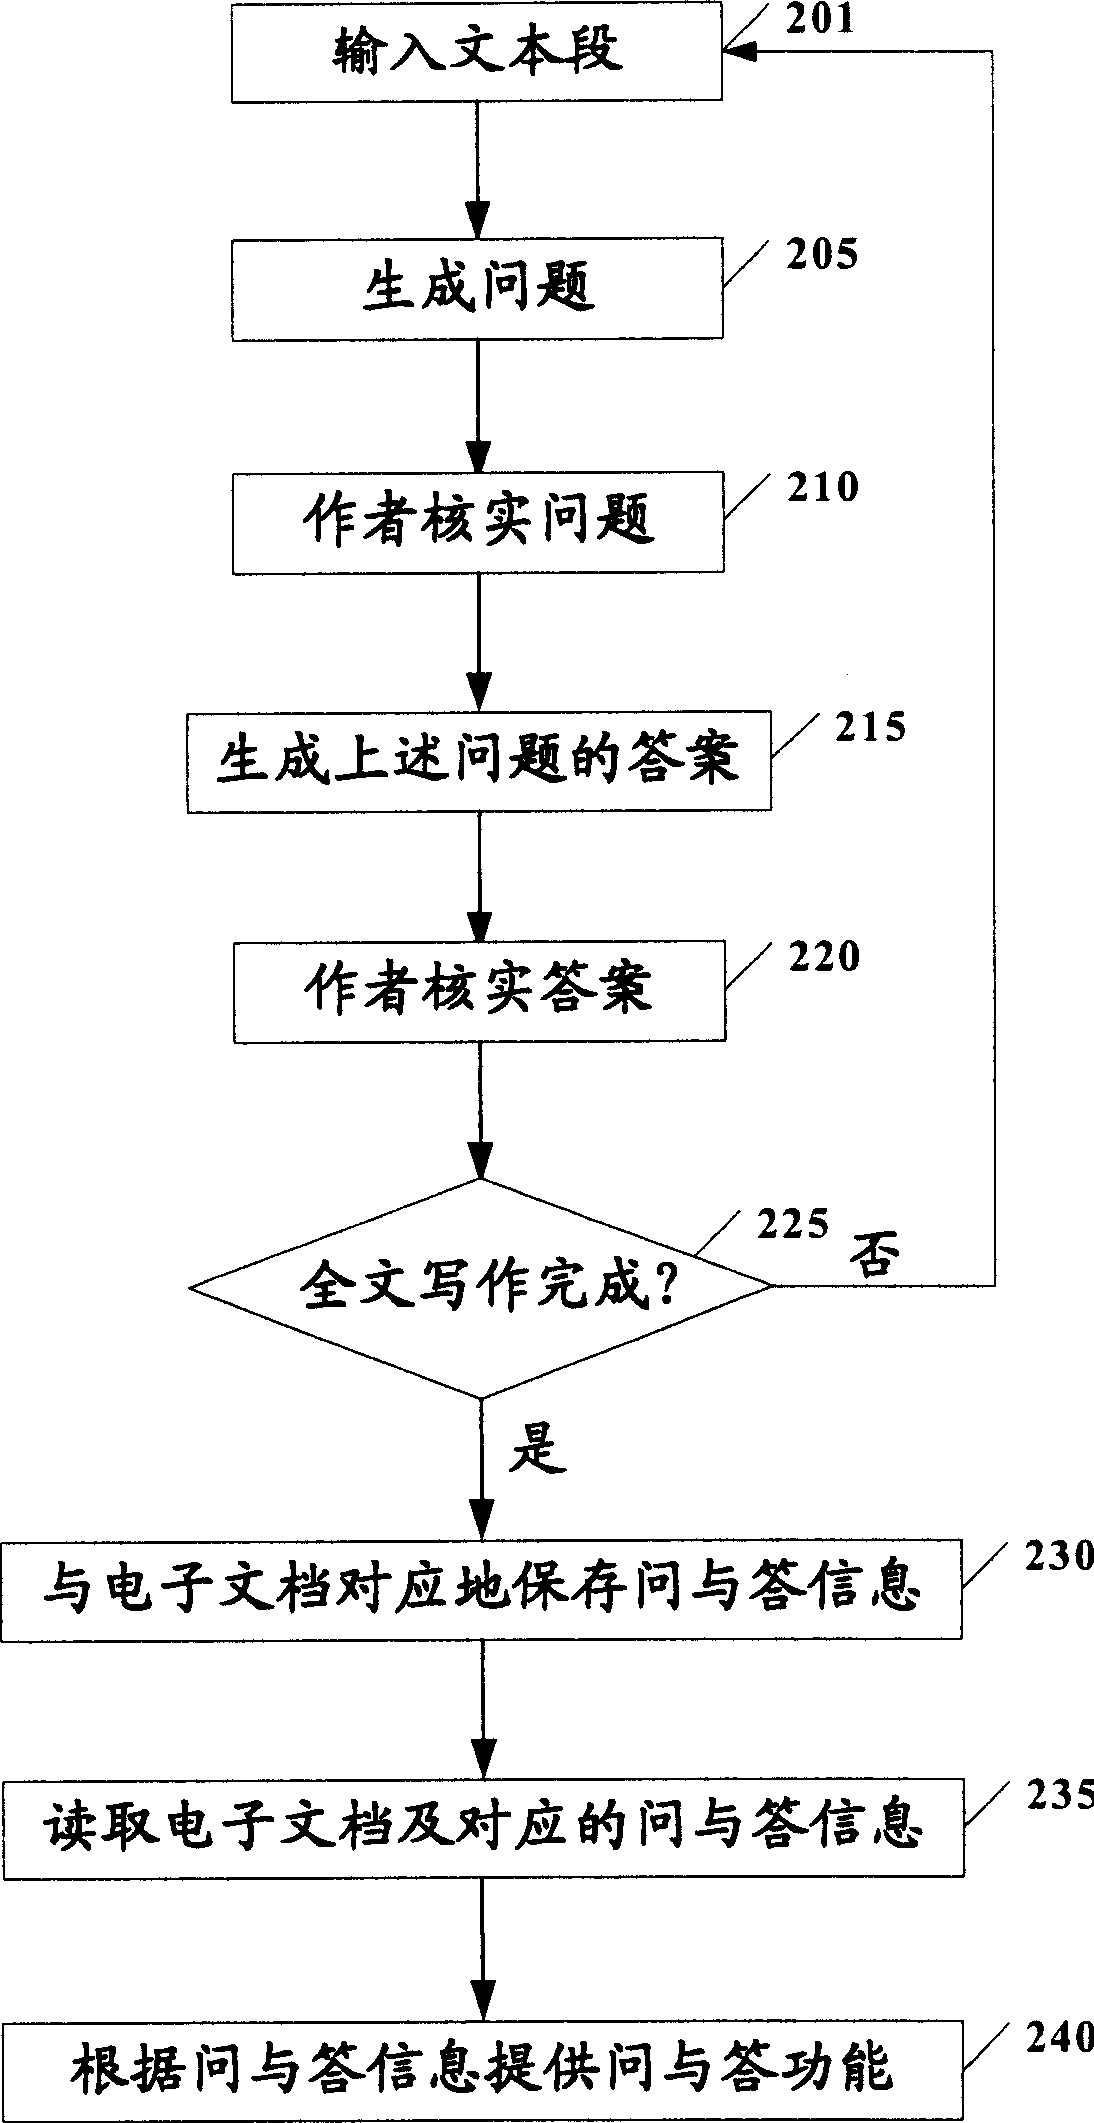 Method and apparatus for implementing question and answer function and computer-aided write